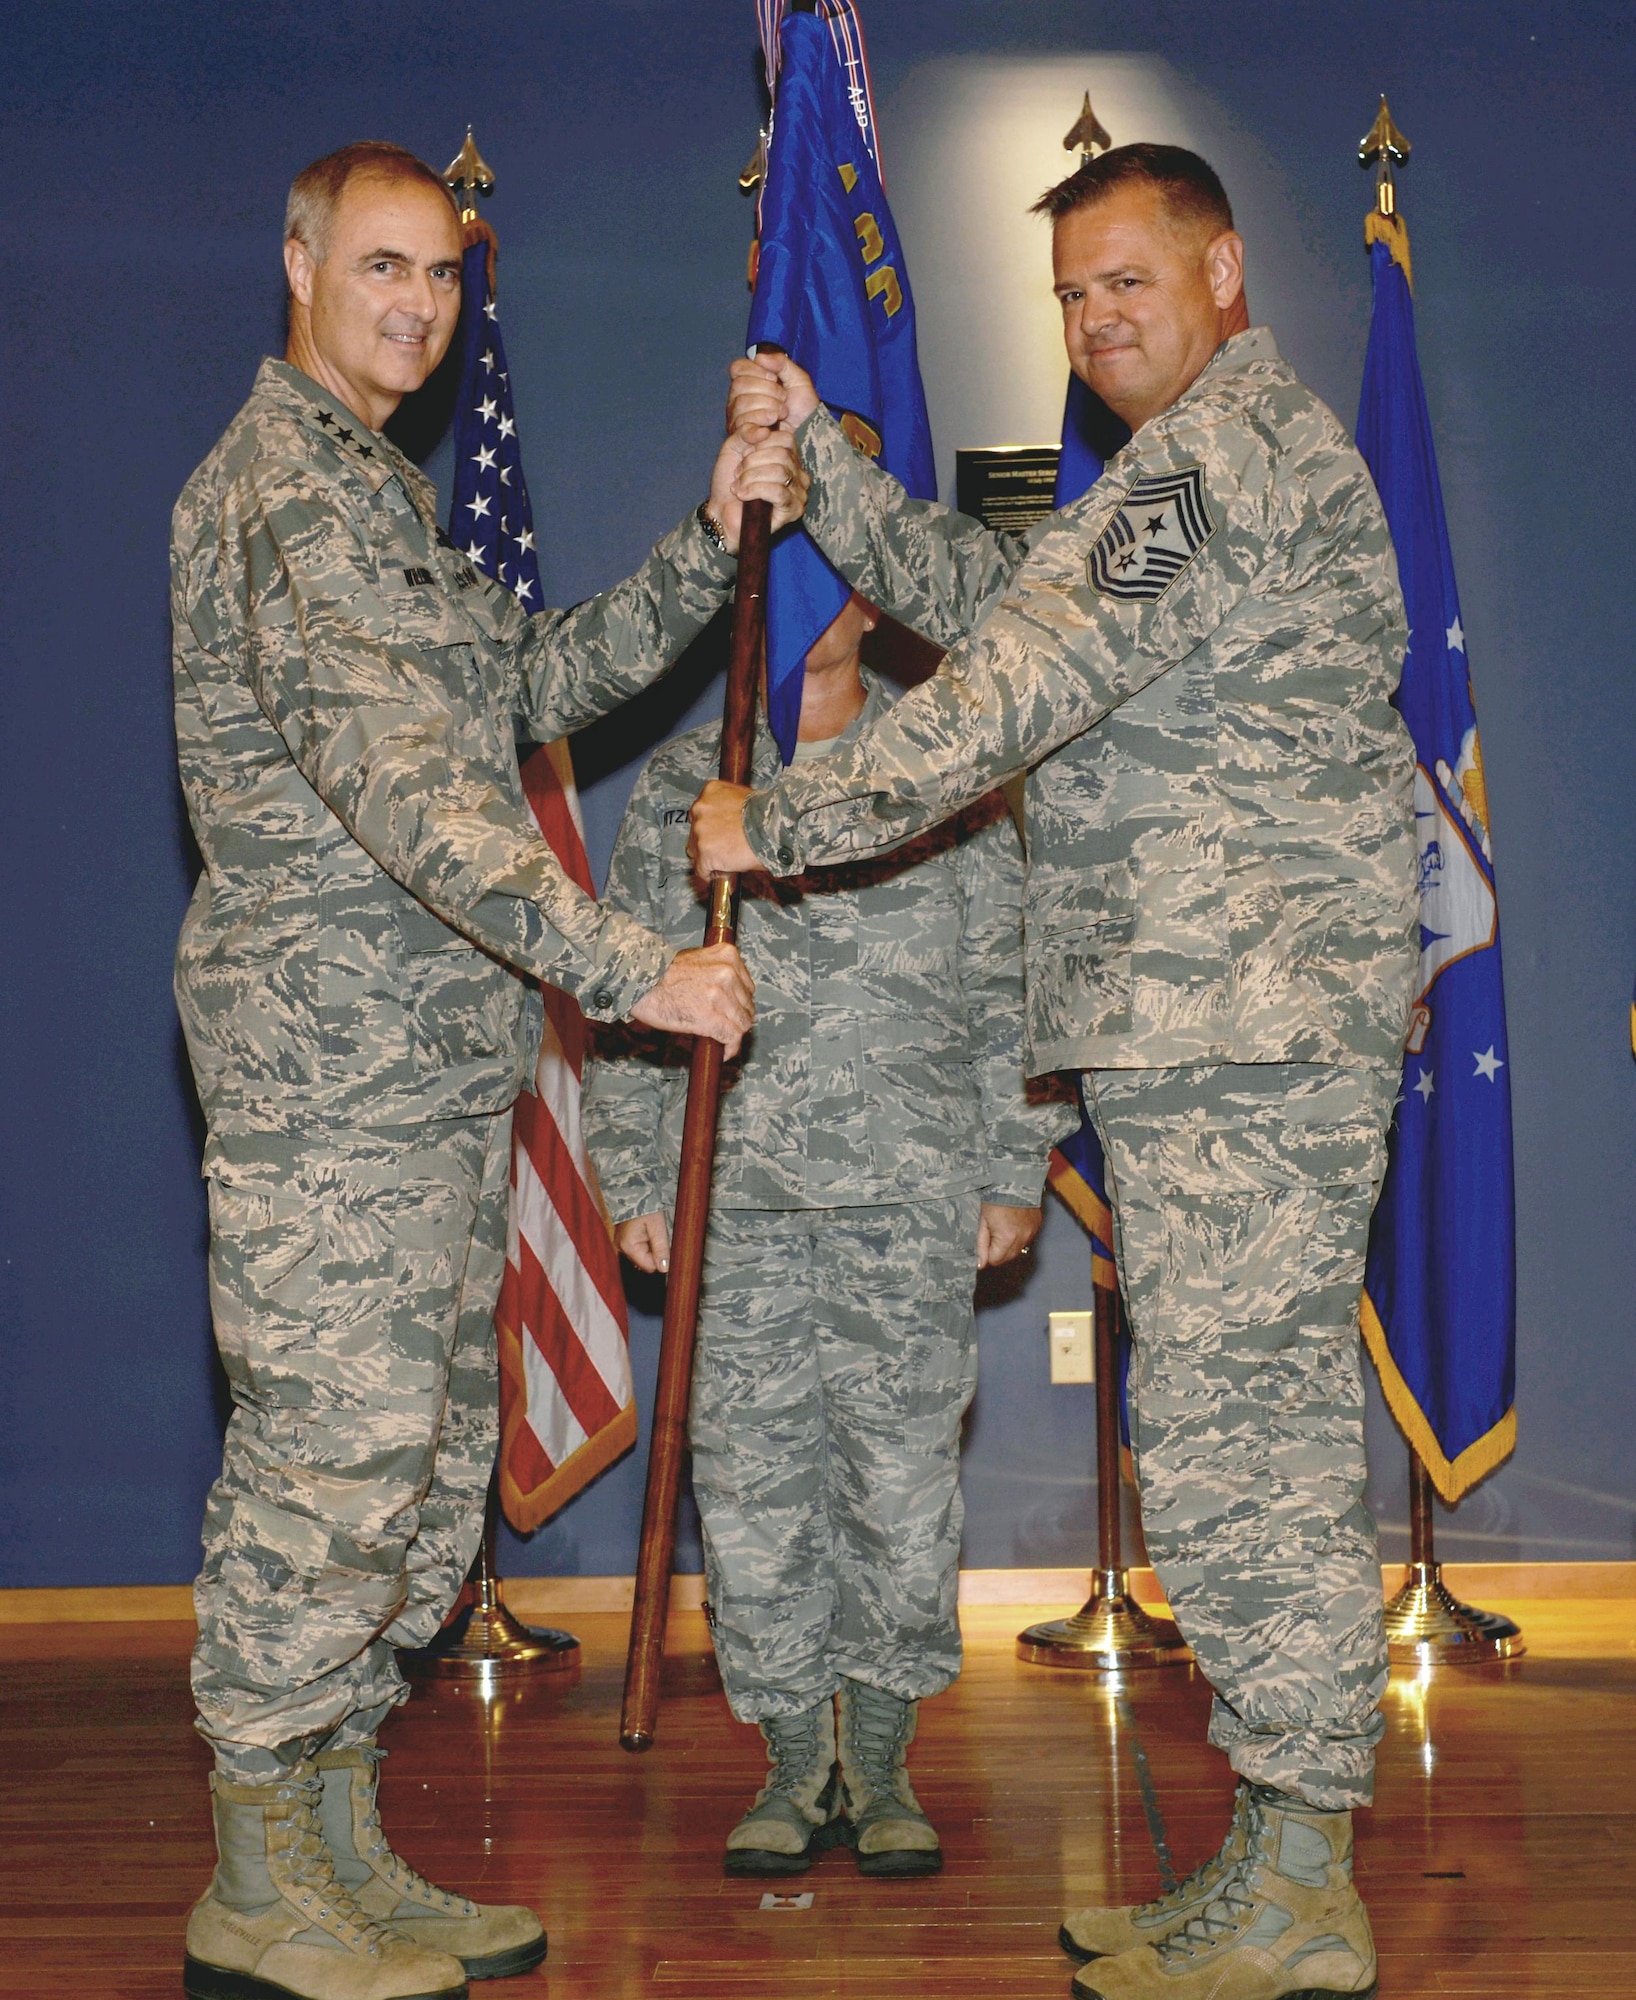 U.S. Air Force Lt. Gen. Scott Williams, Continental U.S. North American Aerospace Defense Command Region and 1st Air Force (Air Forces Northern) Commander, passes the 1AF guidon to Chief Master Sgt. Richard King during the change of authority ceremony at Tyndall Air Force Base, Fla., Aug. 15. King assumed the position from interim Command Chief, Chief Master Sgt. Tiffiney Kellum. (U.S. Air Force photo by Maj. Kat Andrews)